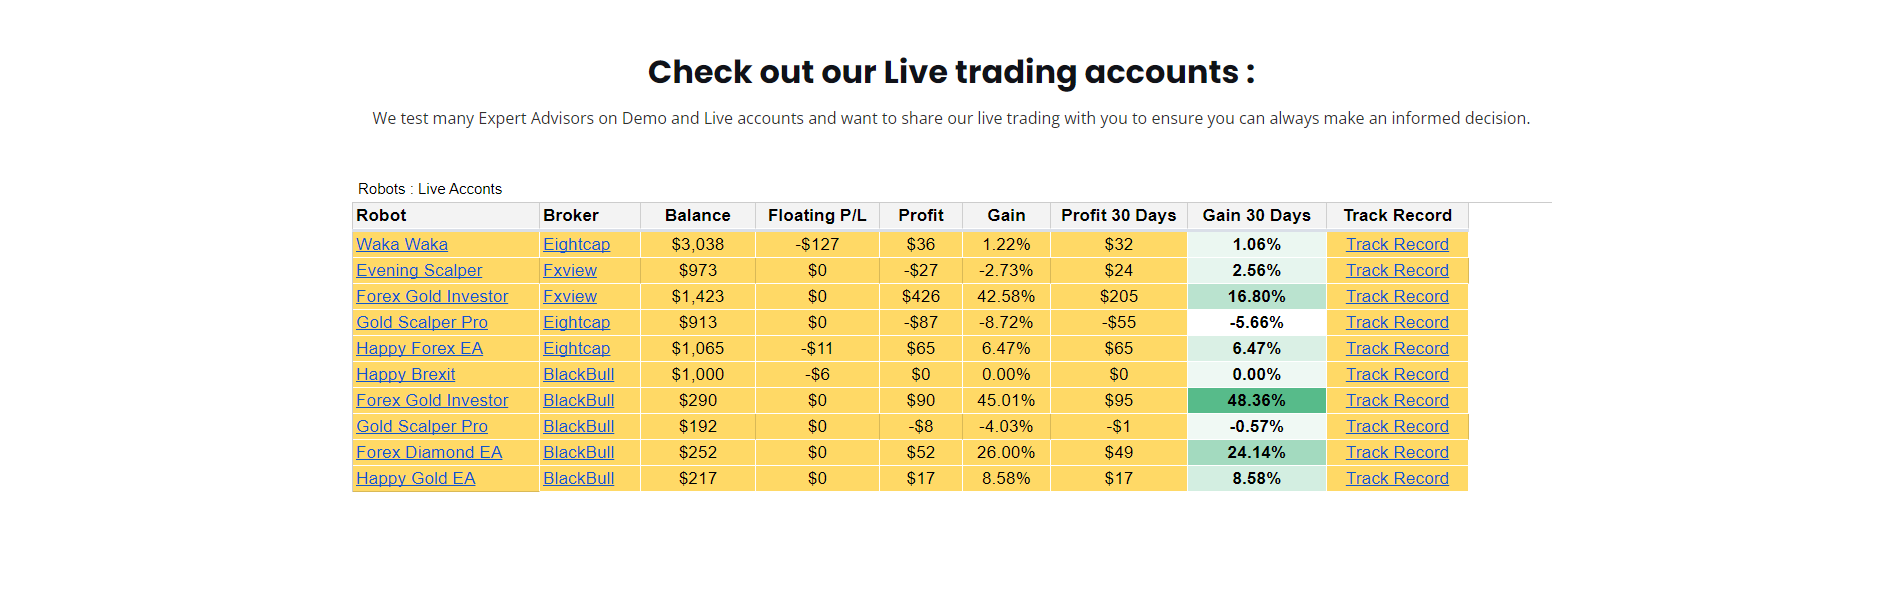 Live Accounts Results Table